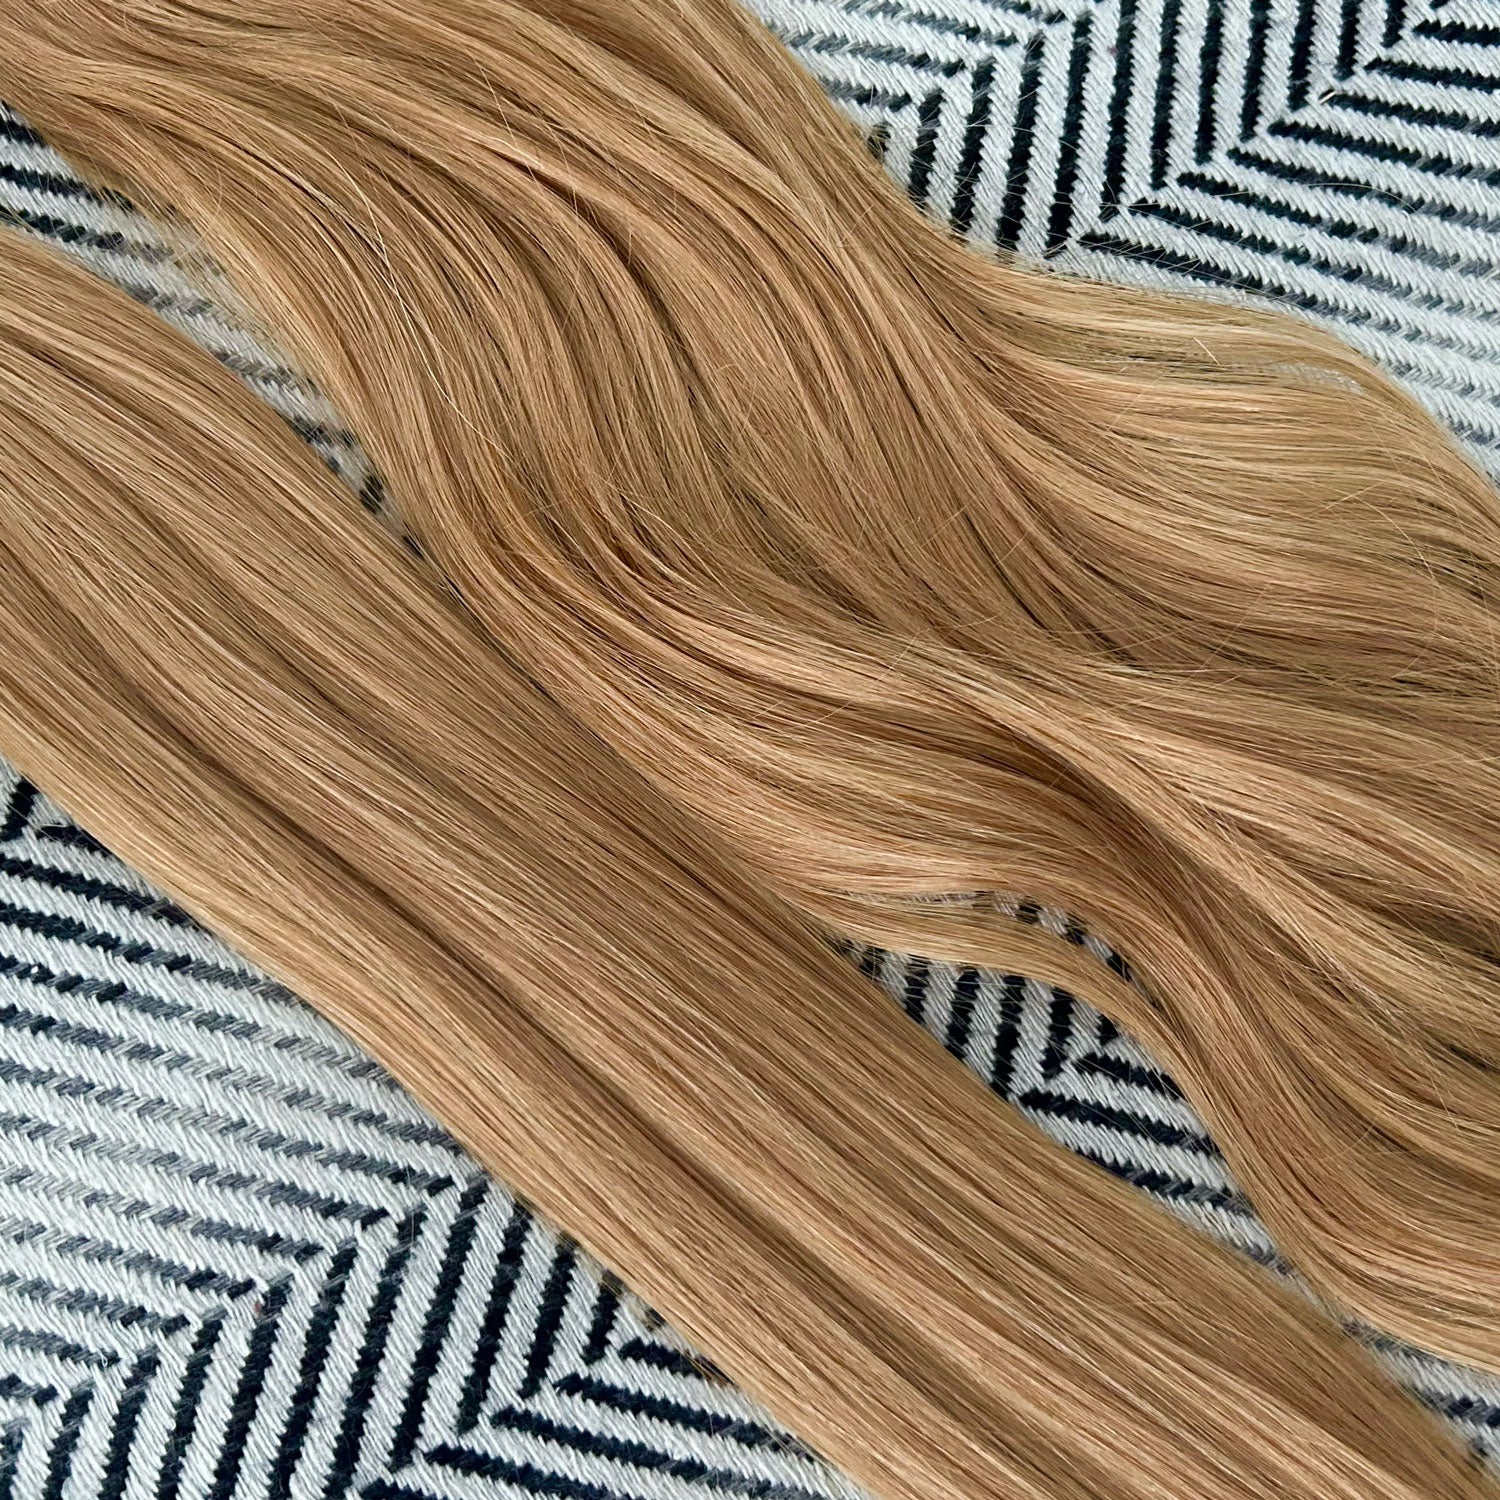 Flat Weft Hair Extensions - #27 Bronzed Blonde 22"